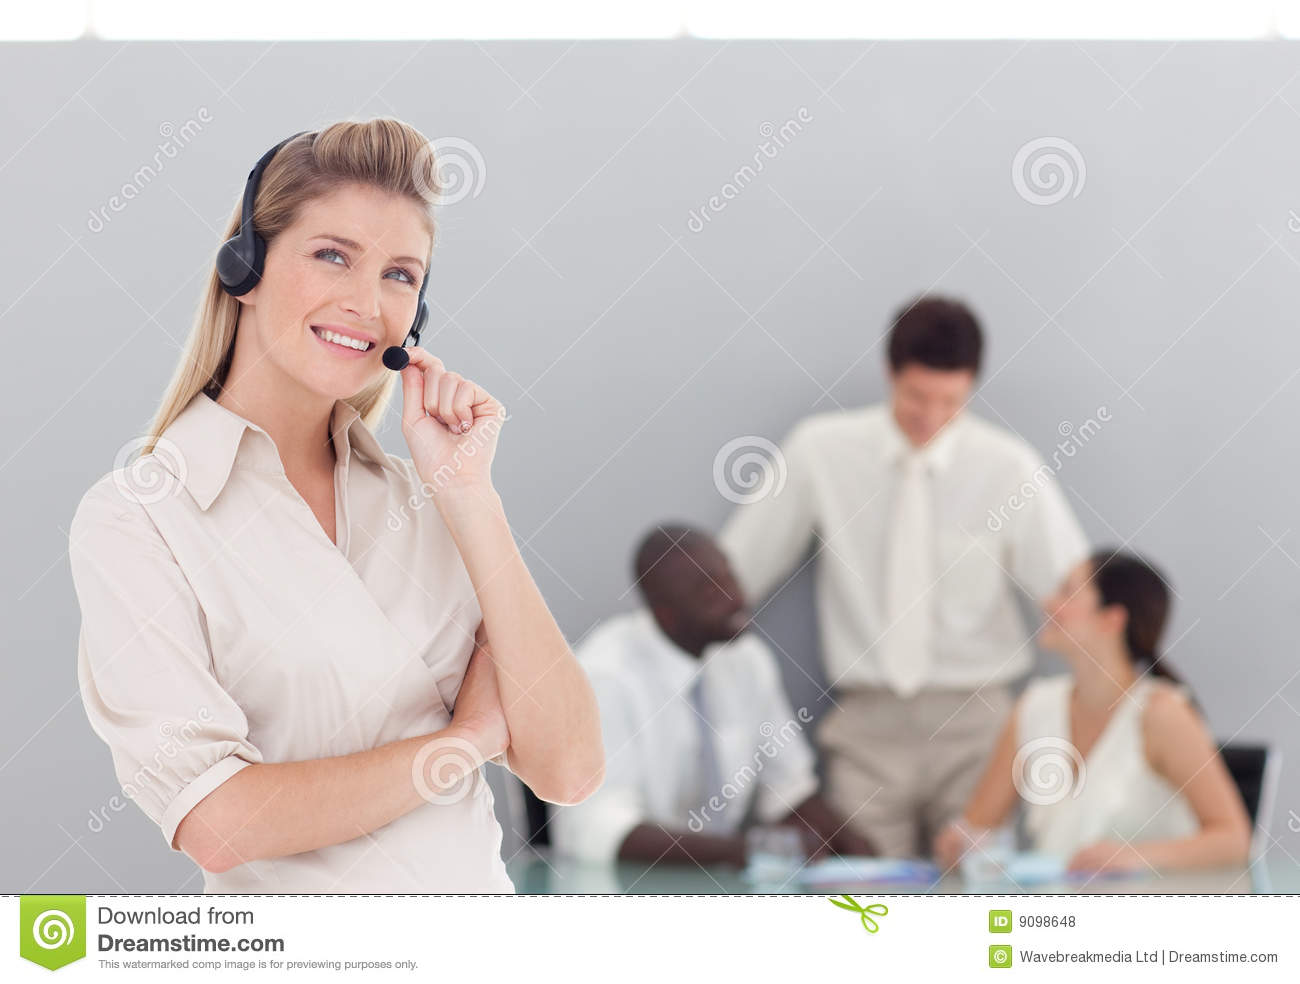 Business Lady On Phone Royalty Free Stock Photos   Image  9098648